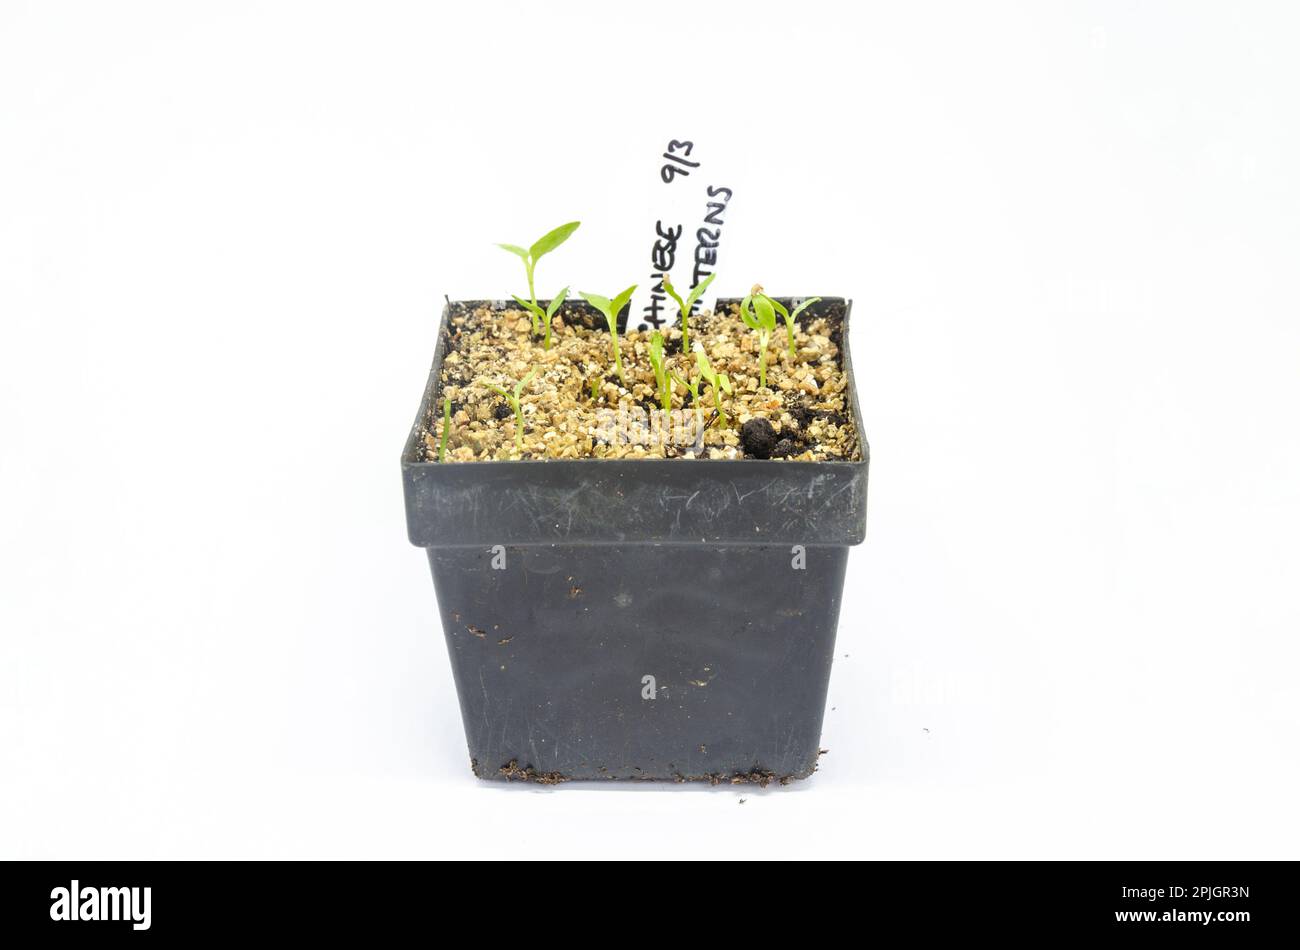 Seedlings growing in a black, plastic plant pot isolated against a white background. Stock Photo